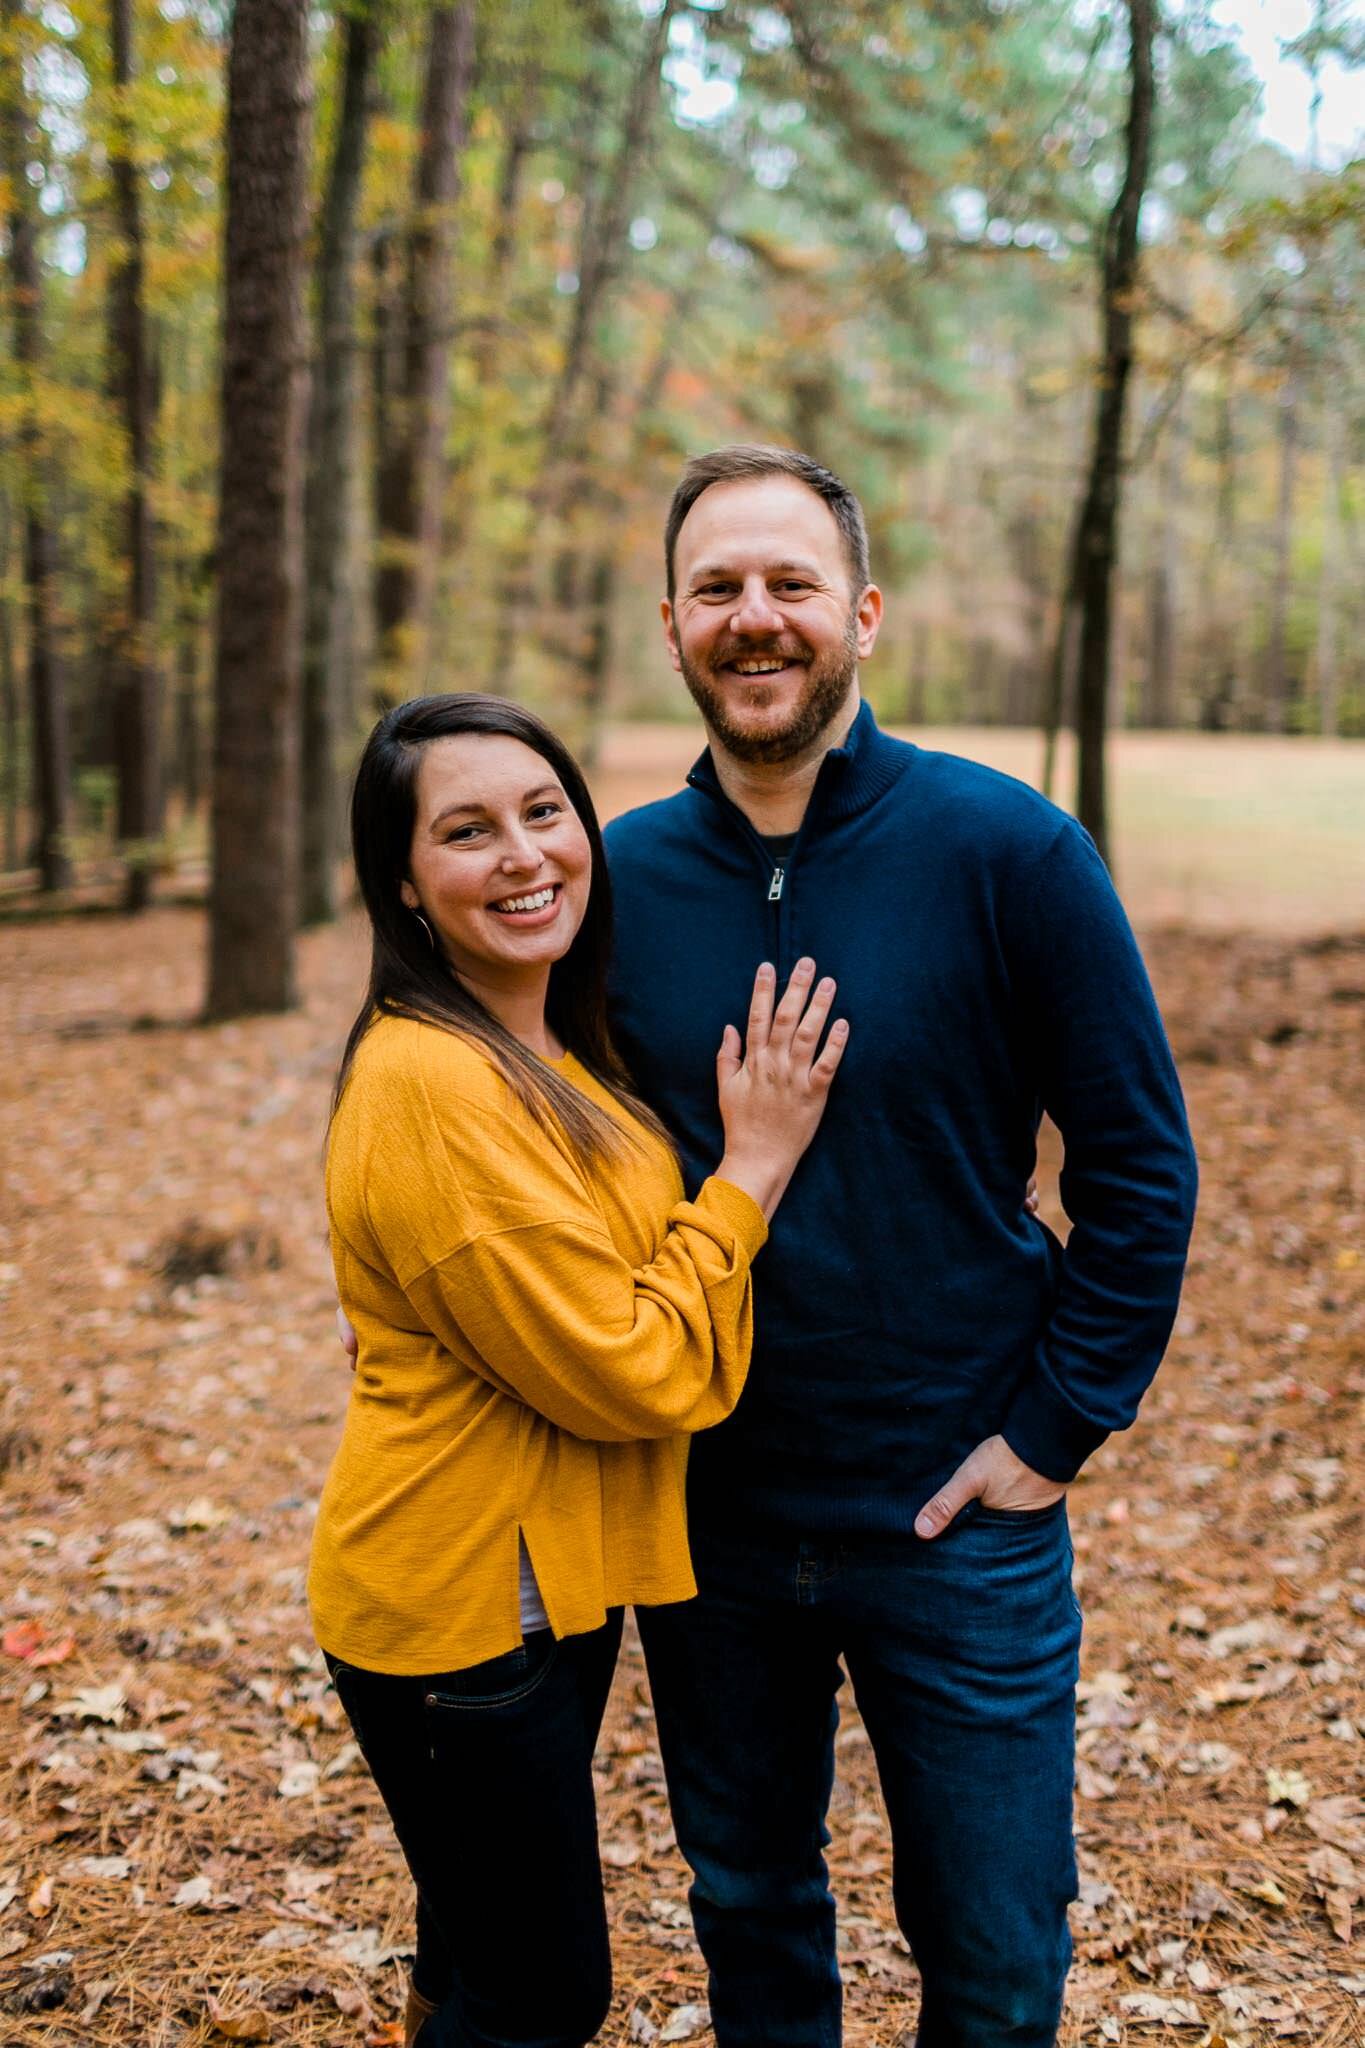 Cute outdoor couples photo at Umstead Park | Durham Photographer | By G. Lin Photography